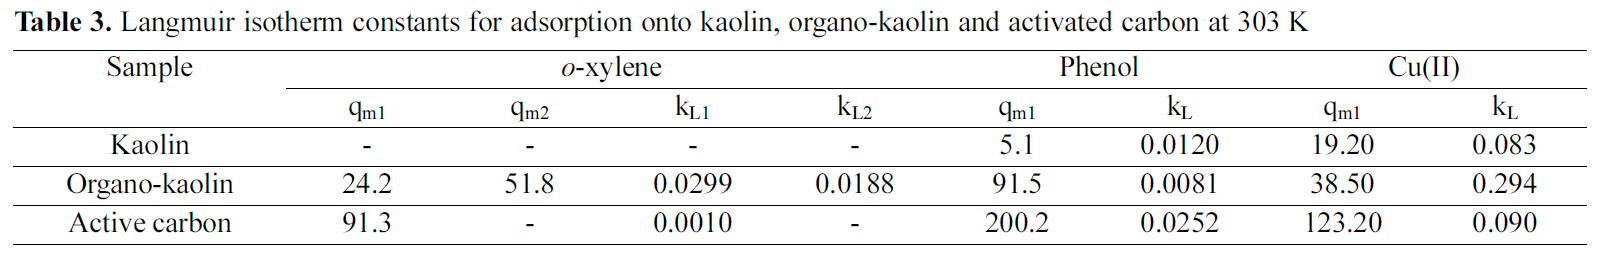 Langmuir isotherm constants for adsorption onto kaolin organo-kaolin and activated carbon at 303 K